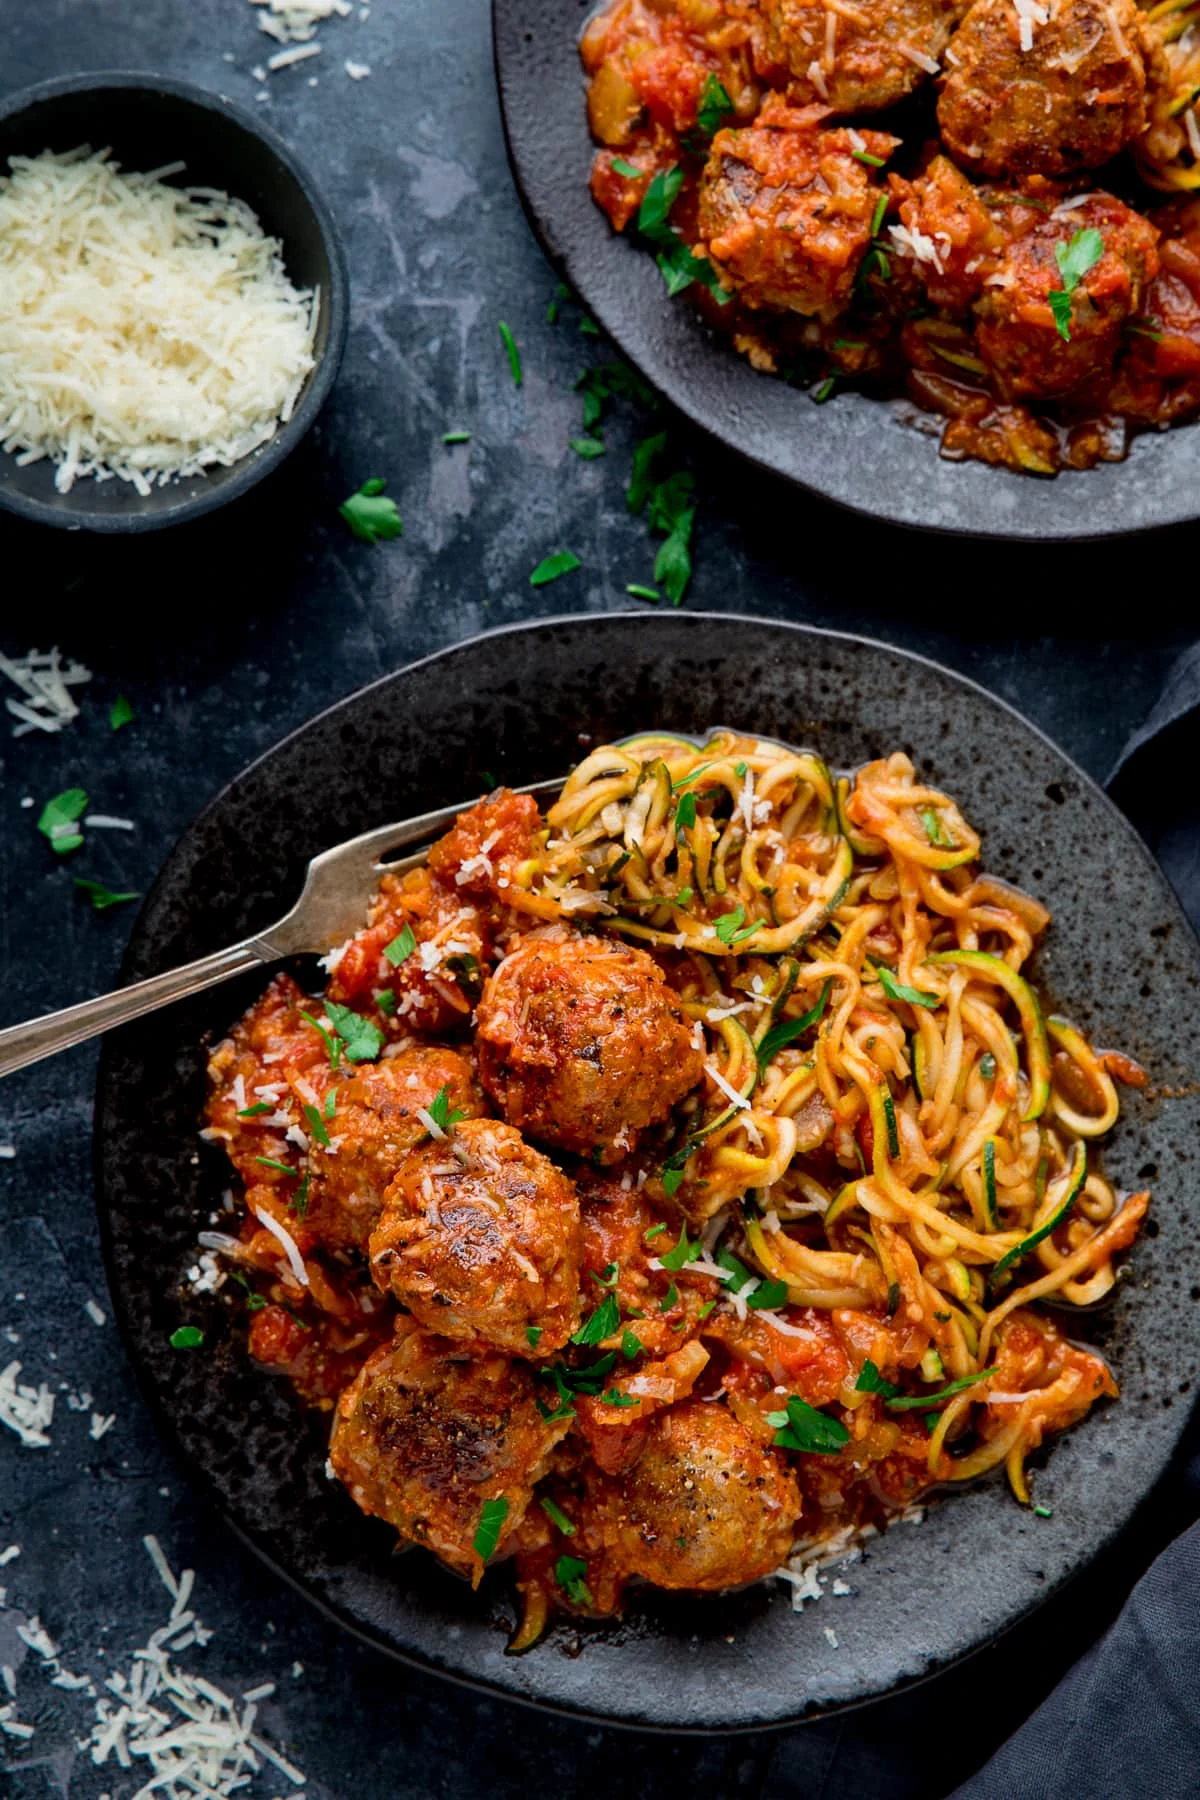 Turkey meatballs and courgetti on a black plate against a dark background